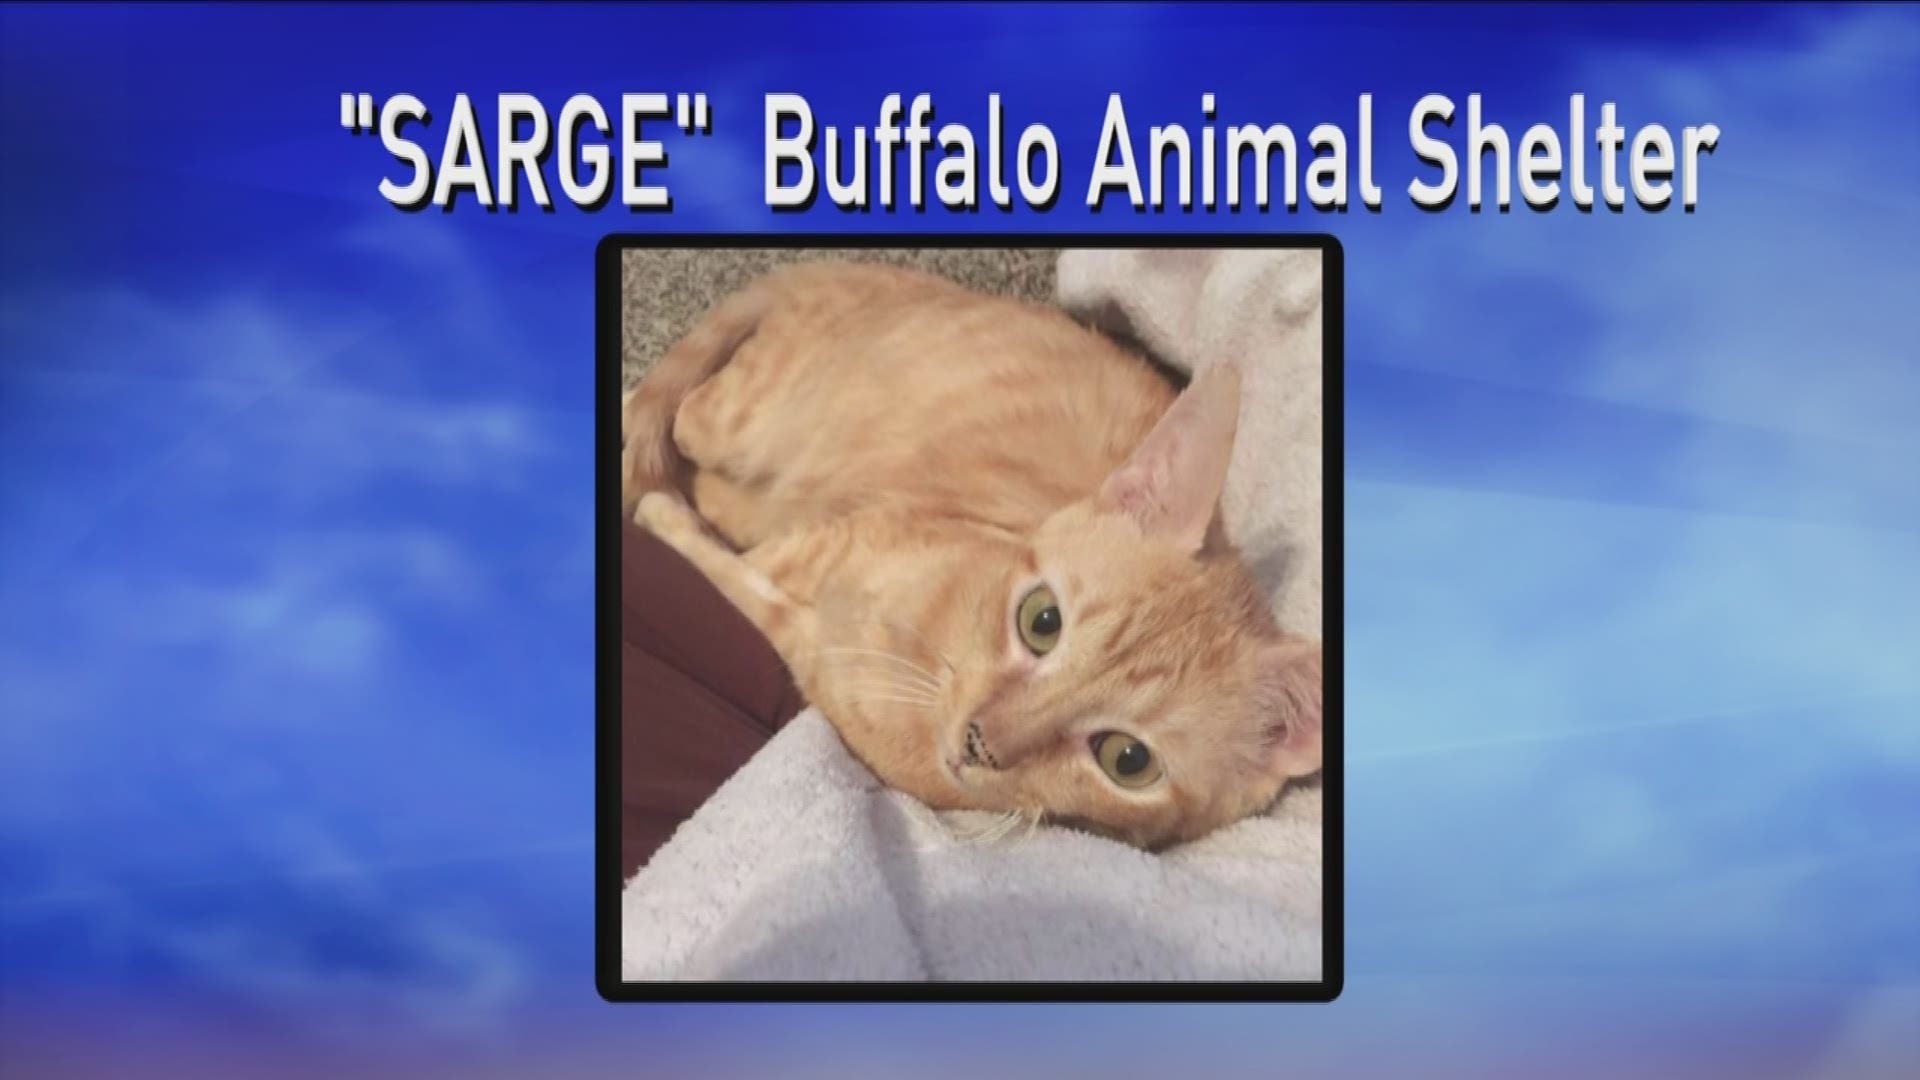 2 On Your Side's Pet of the Week is Sarge, a sweet male cat looking for a loving home. He is available for adoption from the Buffalo Animal Shelter.